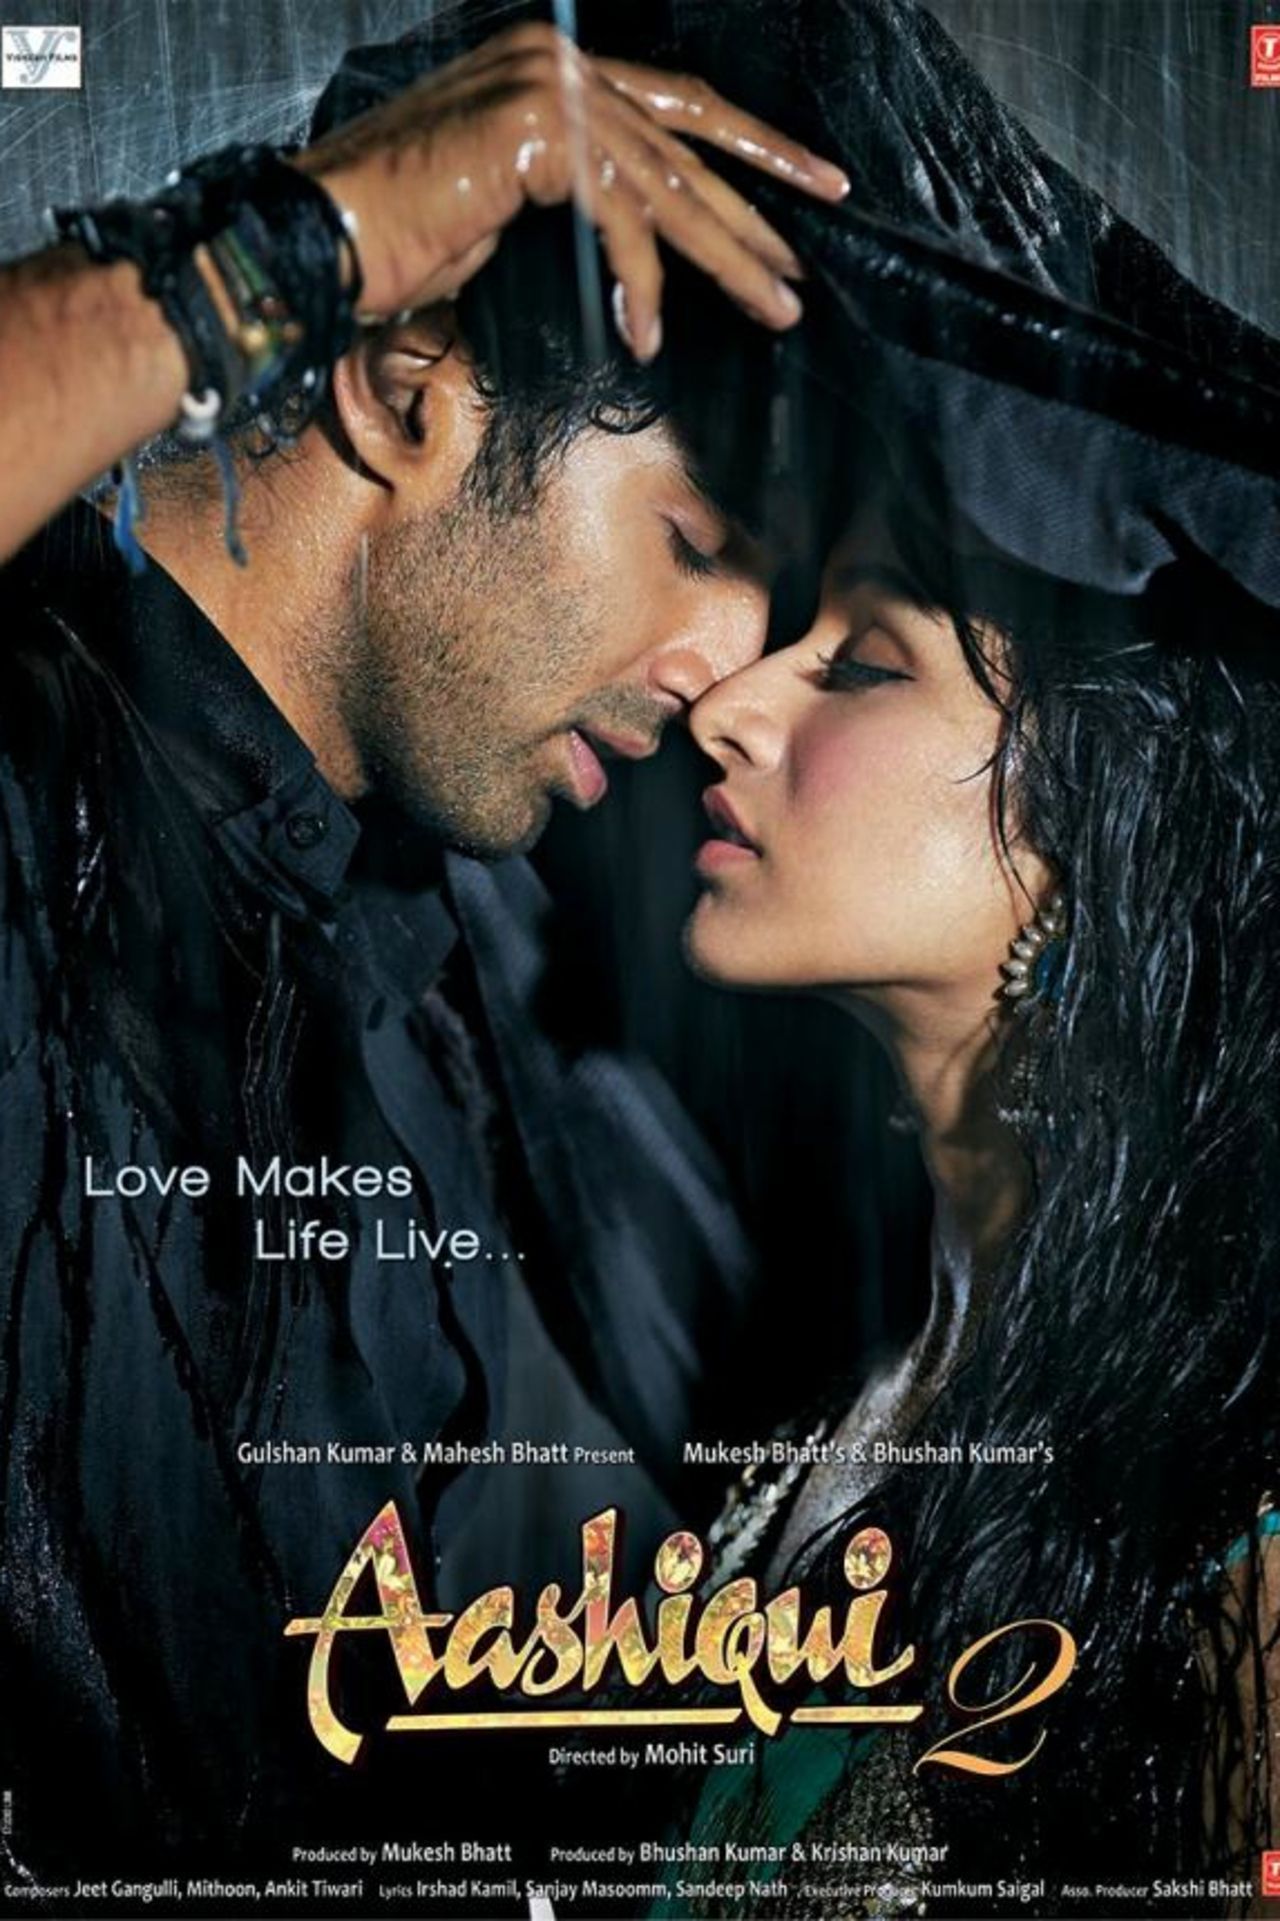 Aashiqui 2 Movie Wallpapers - Wallpaper Cave